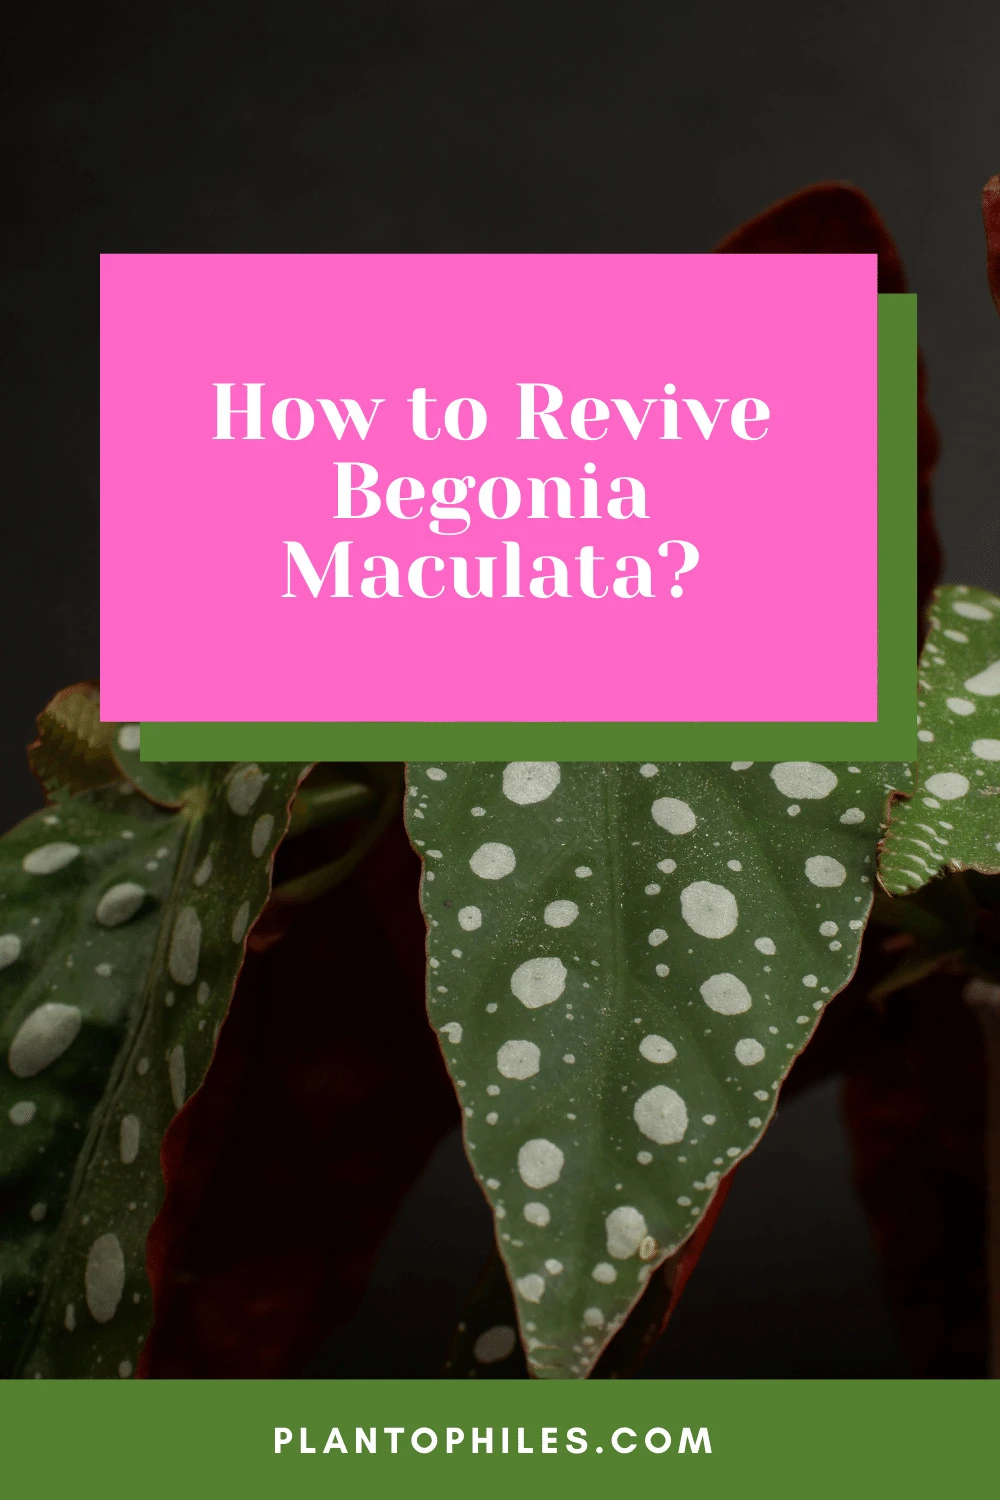 How to Revive Begonia Maculata?